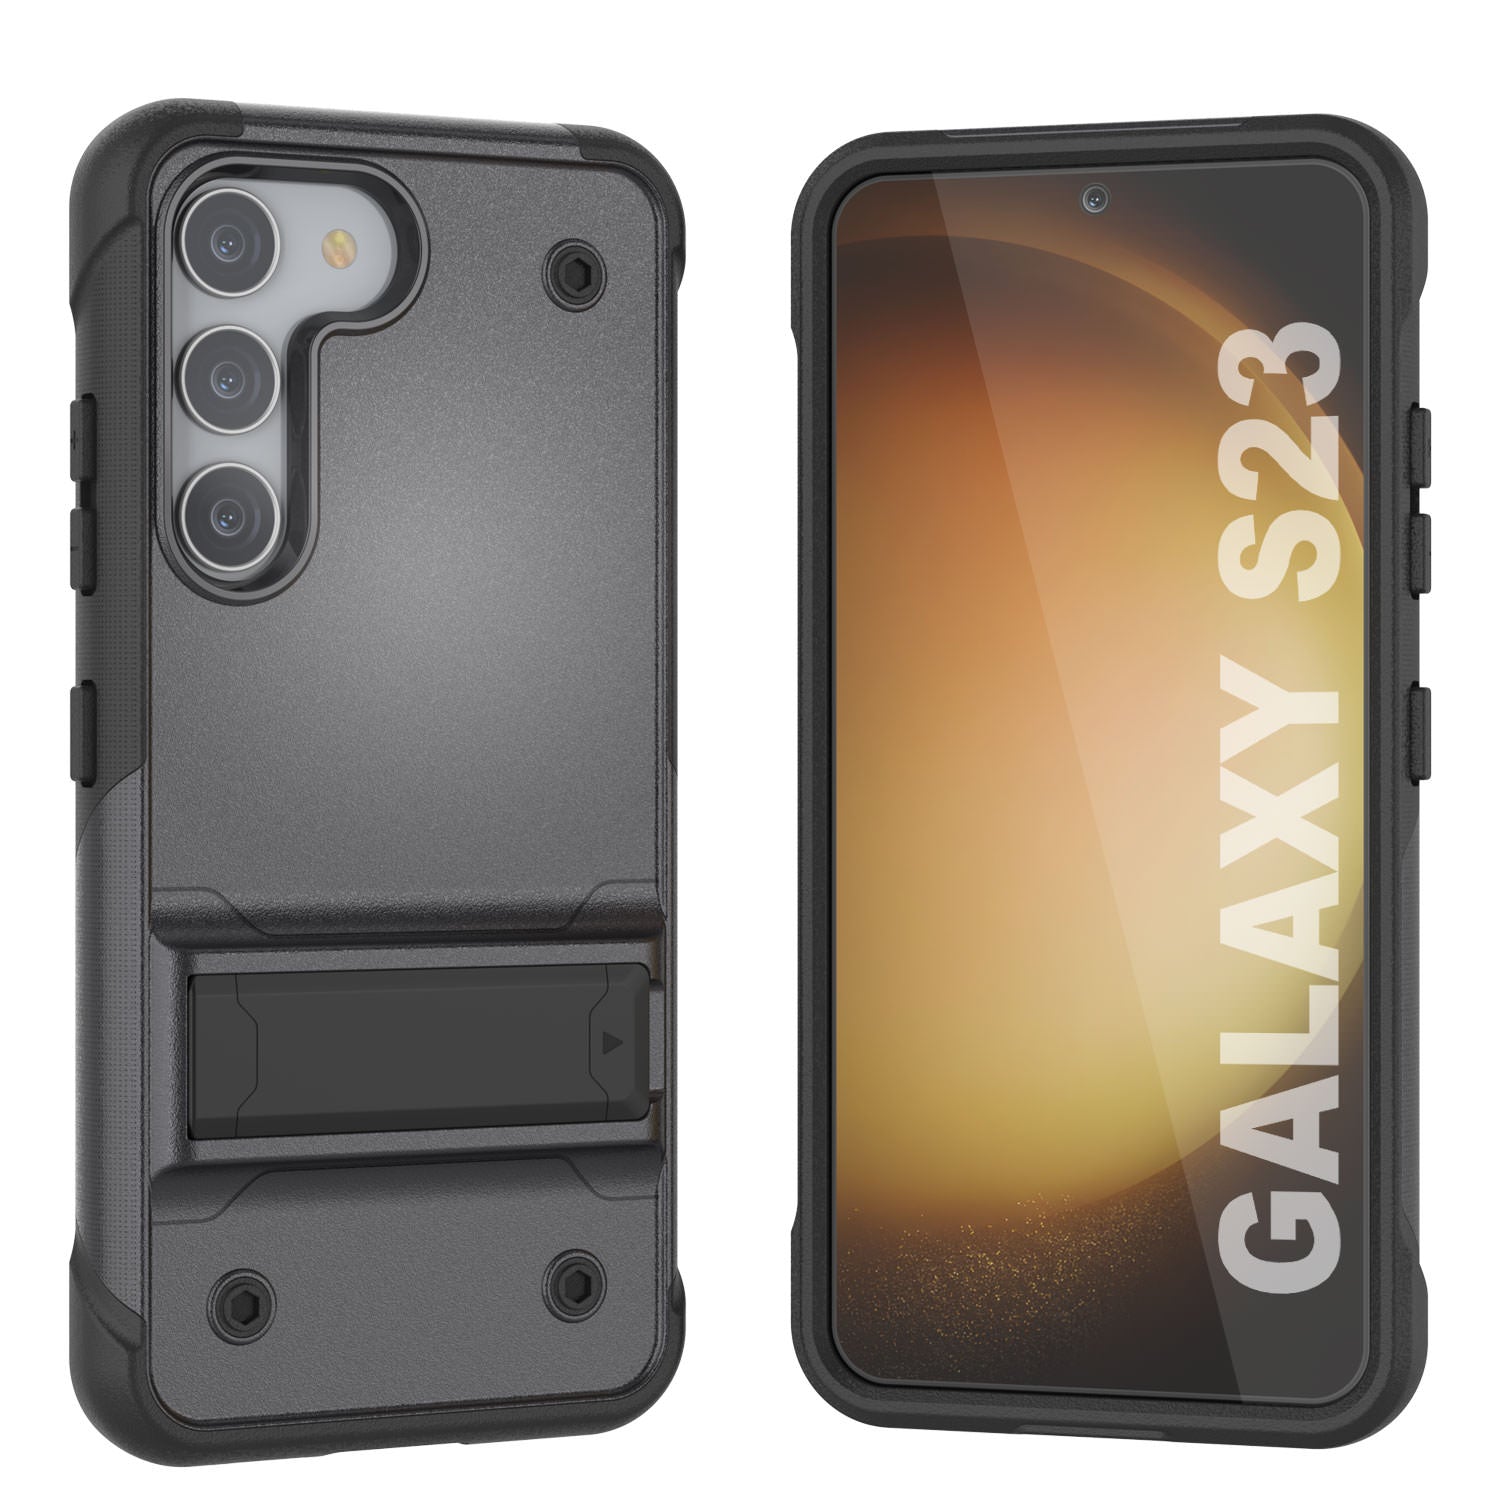 Punkcase Galaxy S23 Case [Reliance Series] Protective Hybrid Military Grade Cover W/Built-in Kickstand [Grey-Black]